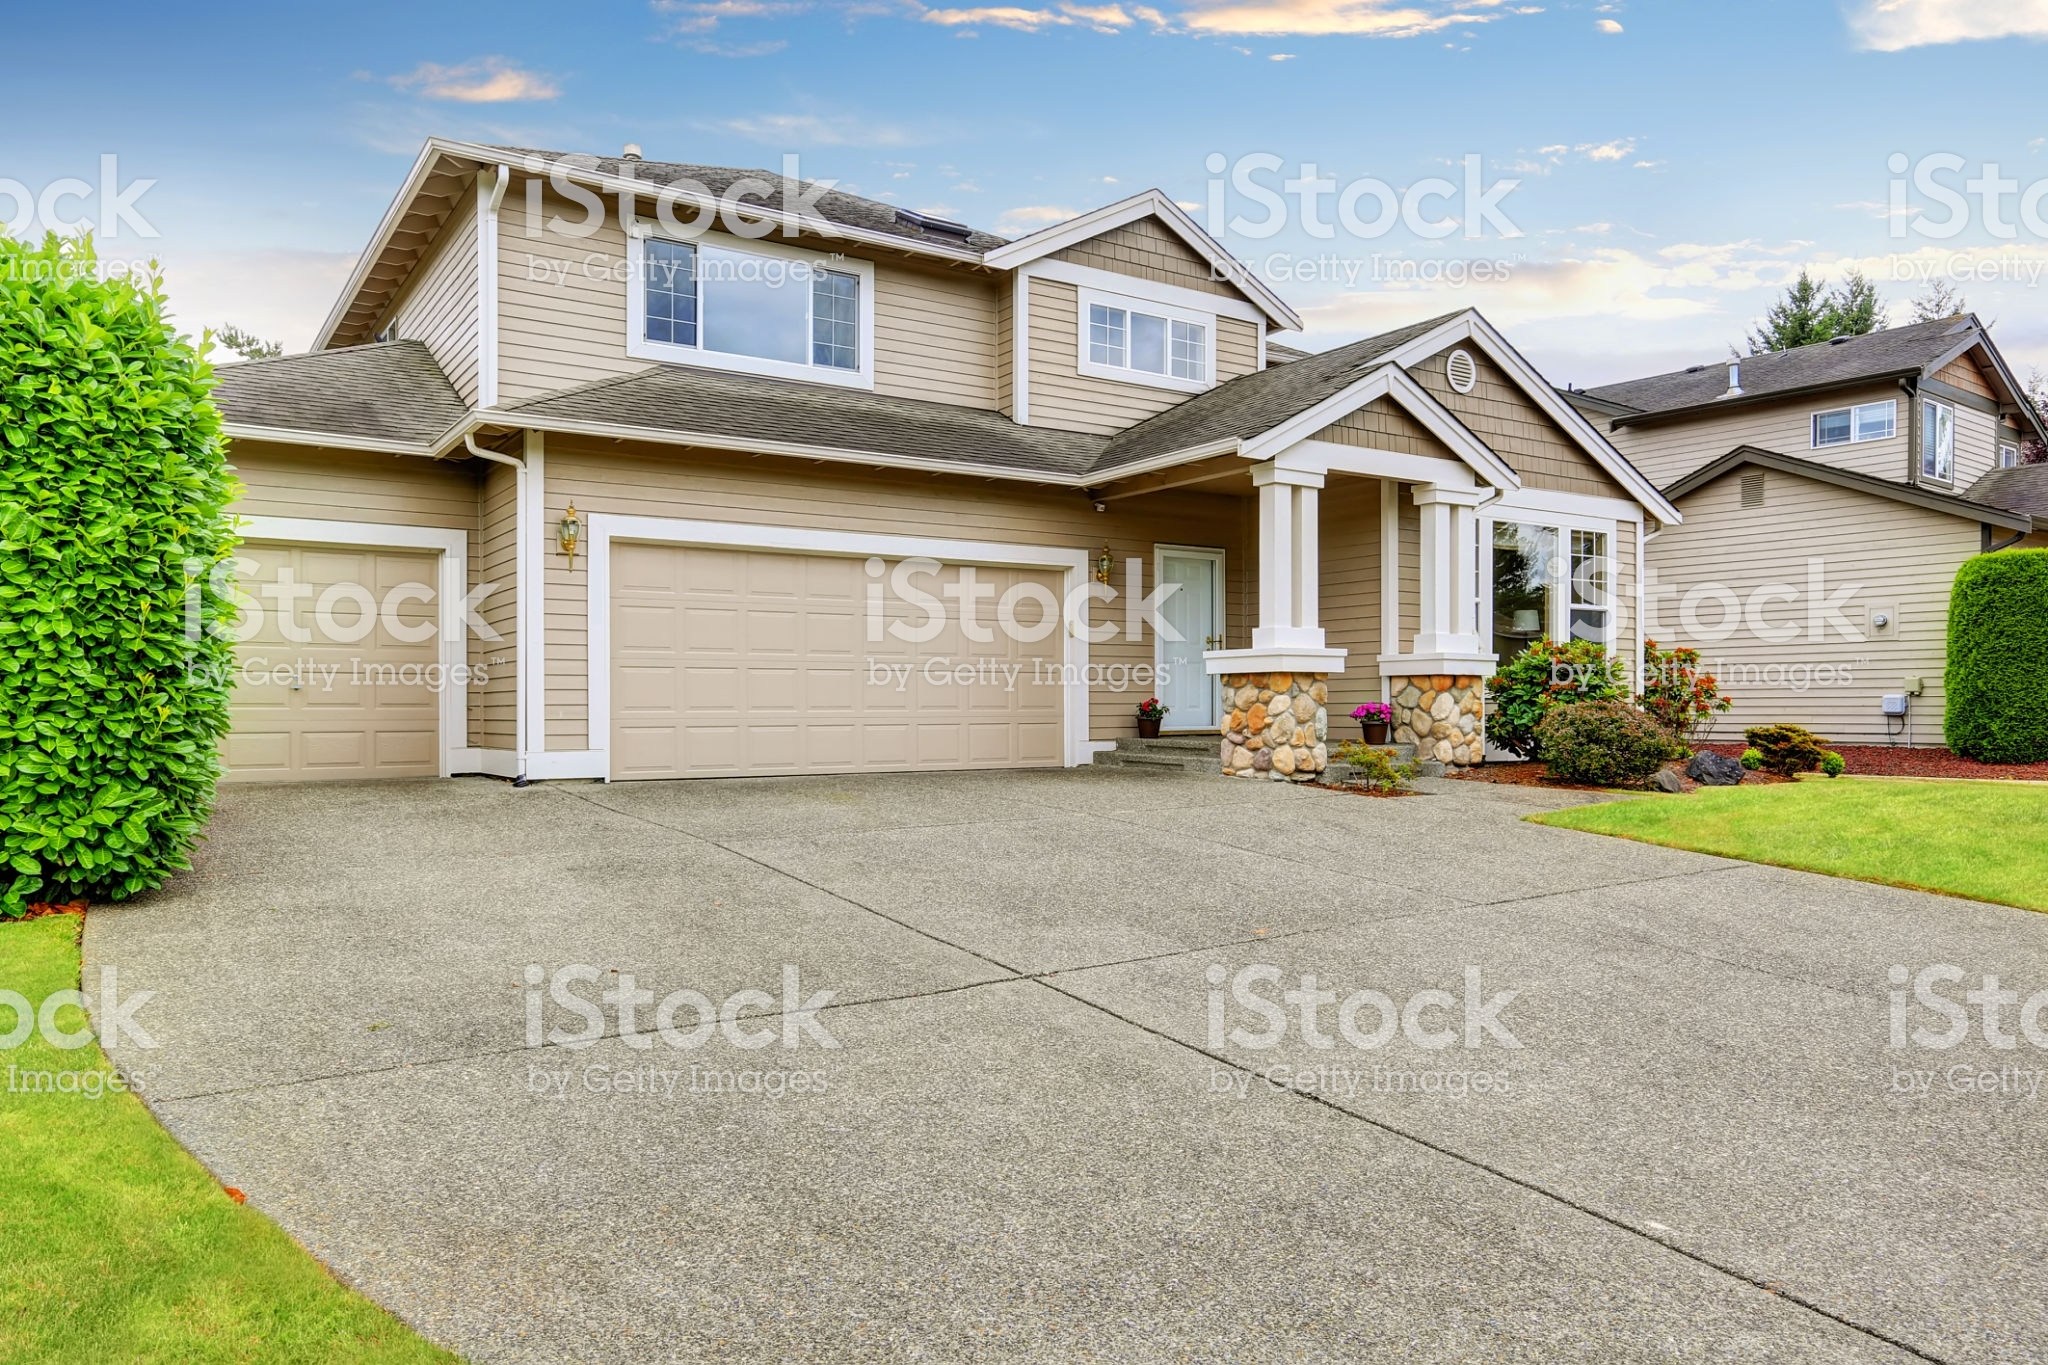 Neat beige home with two garage spaces and large concrete driveway. Northwest, USA